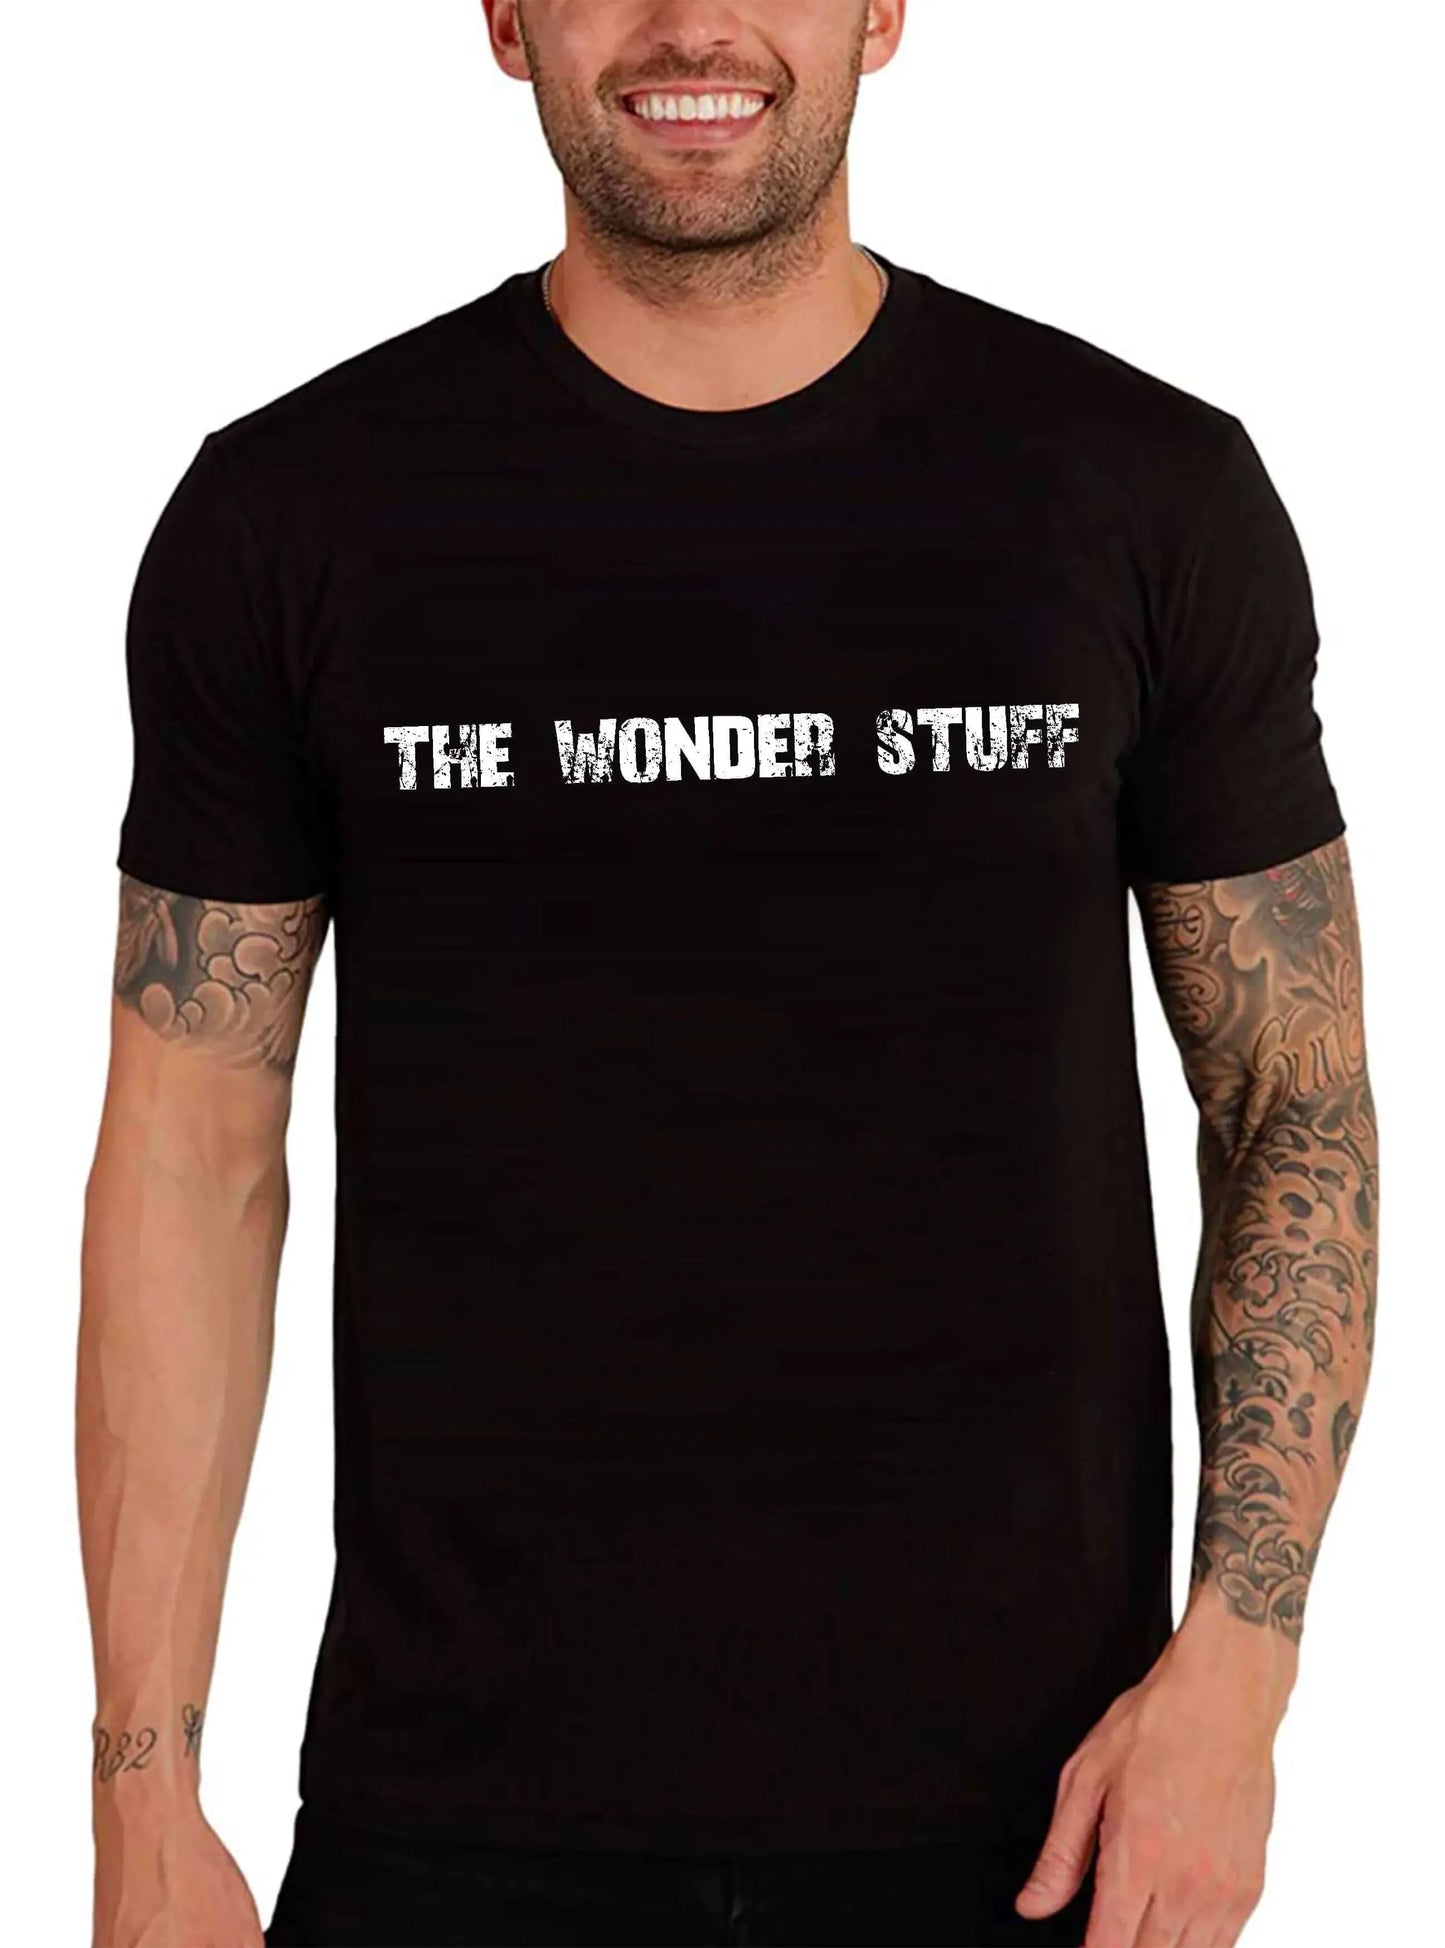 Men's Graphic T-Shirt The Wonder Stuff Eco-Friendly Limited Edition Short Sleeve Tee-Shirt Vintage Birthday Gift Novelty